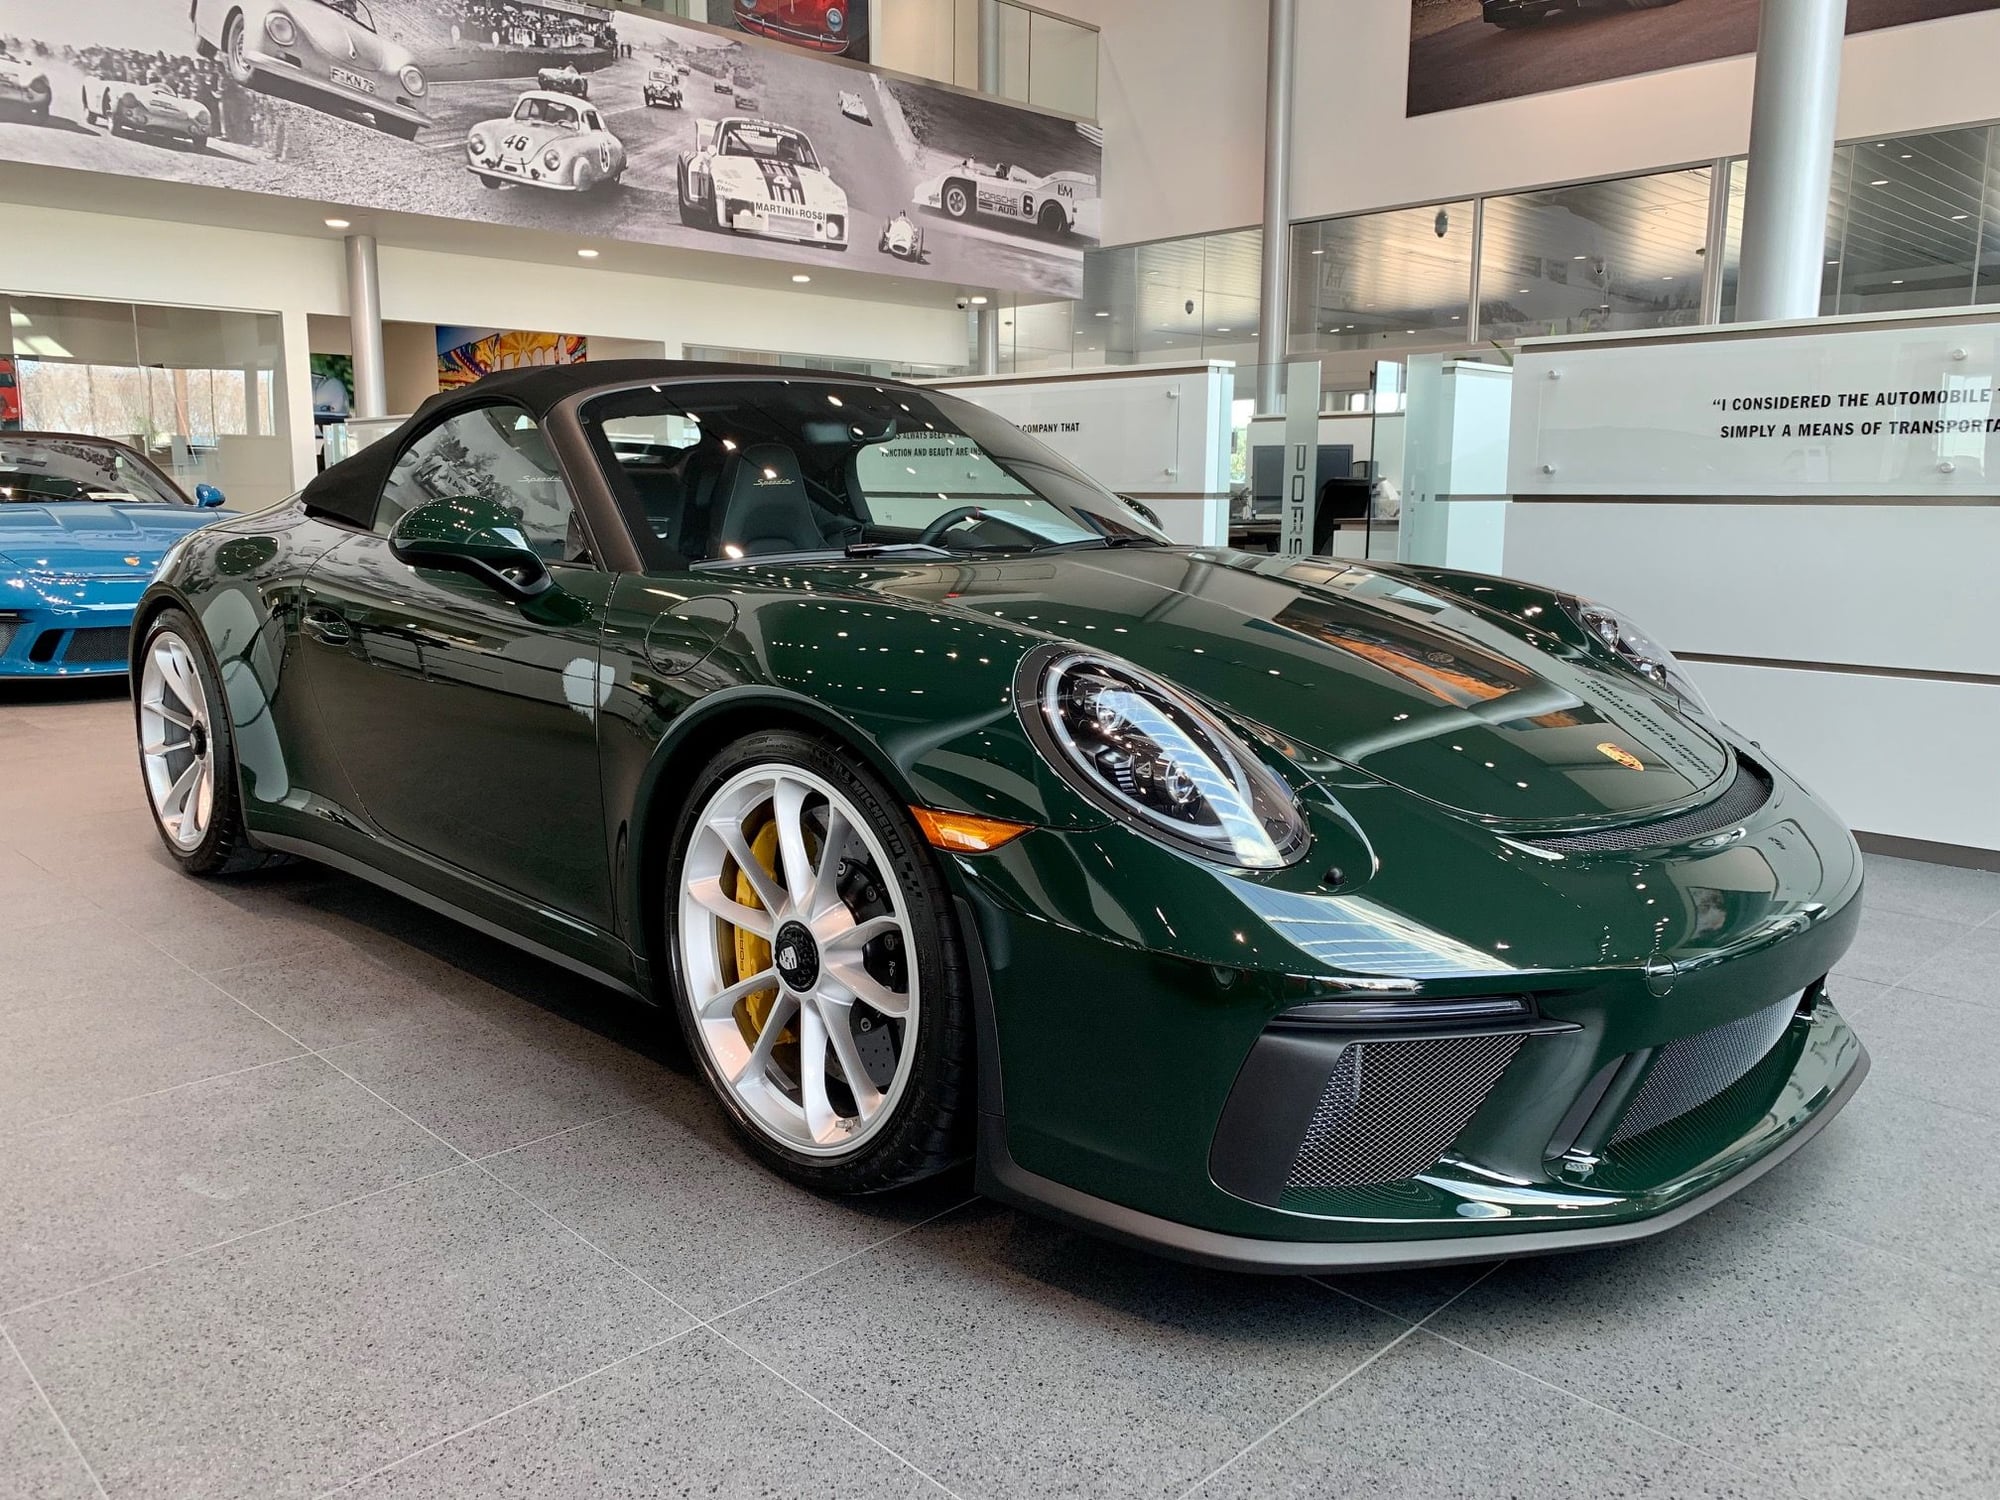 2019 Porsche 911 - 2019 911 Speedster PTS Brewster Green - Used - VIN WP0CF2A98KS172384 - 15 Miles - 6 cyl - 2WD - Manual - Convertible - Other - Houston, TX 77090, United States